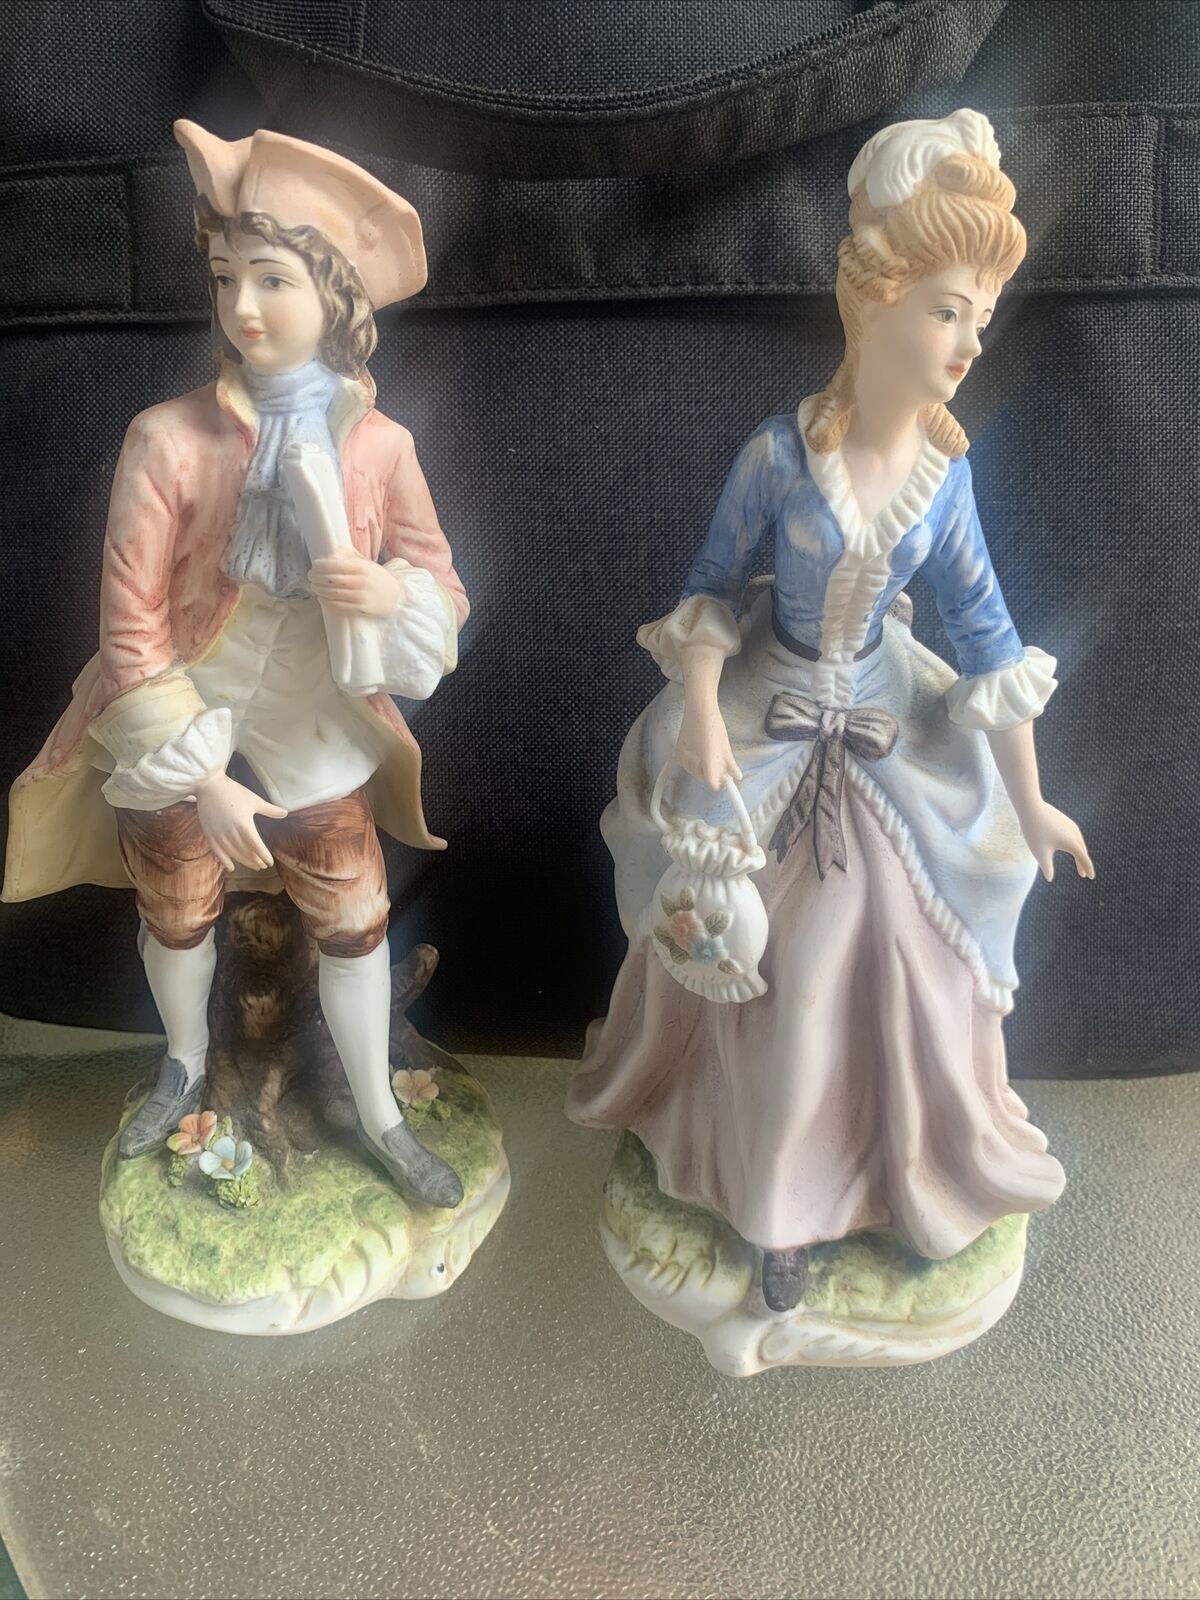 Pair Of Hand Painted Lefton china figurines. KW345 A&B. No Chips Or Cracks